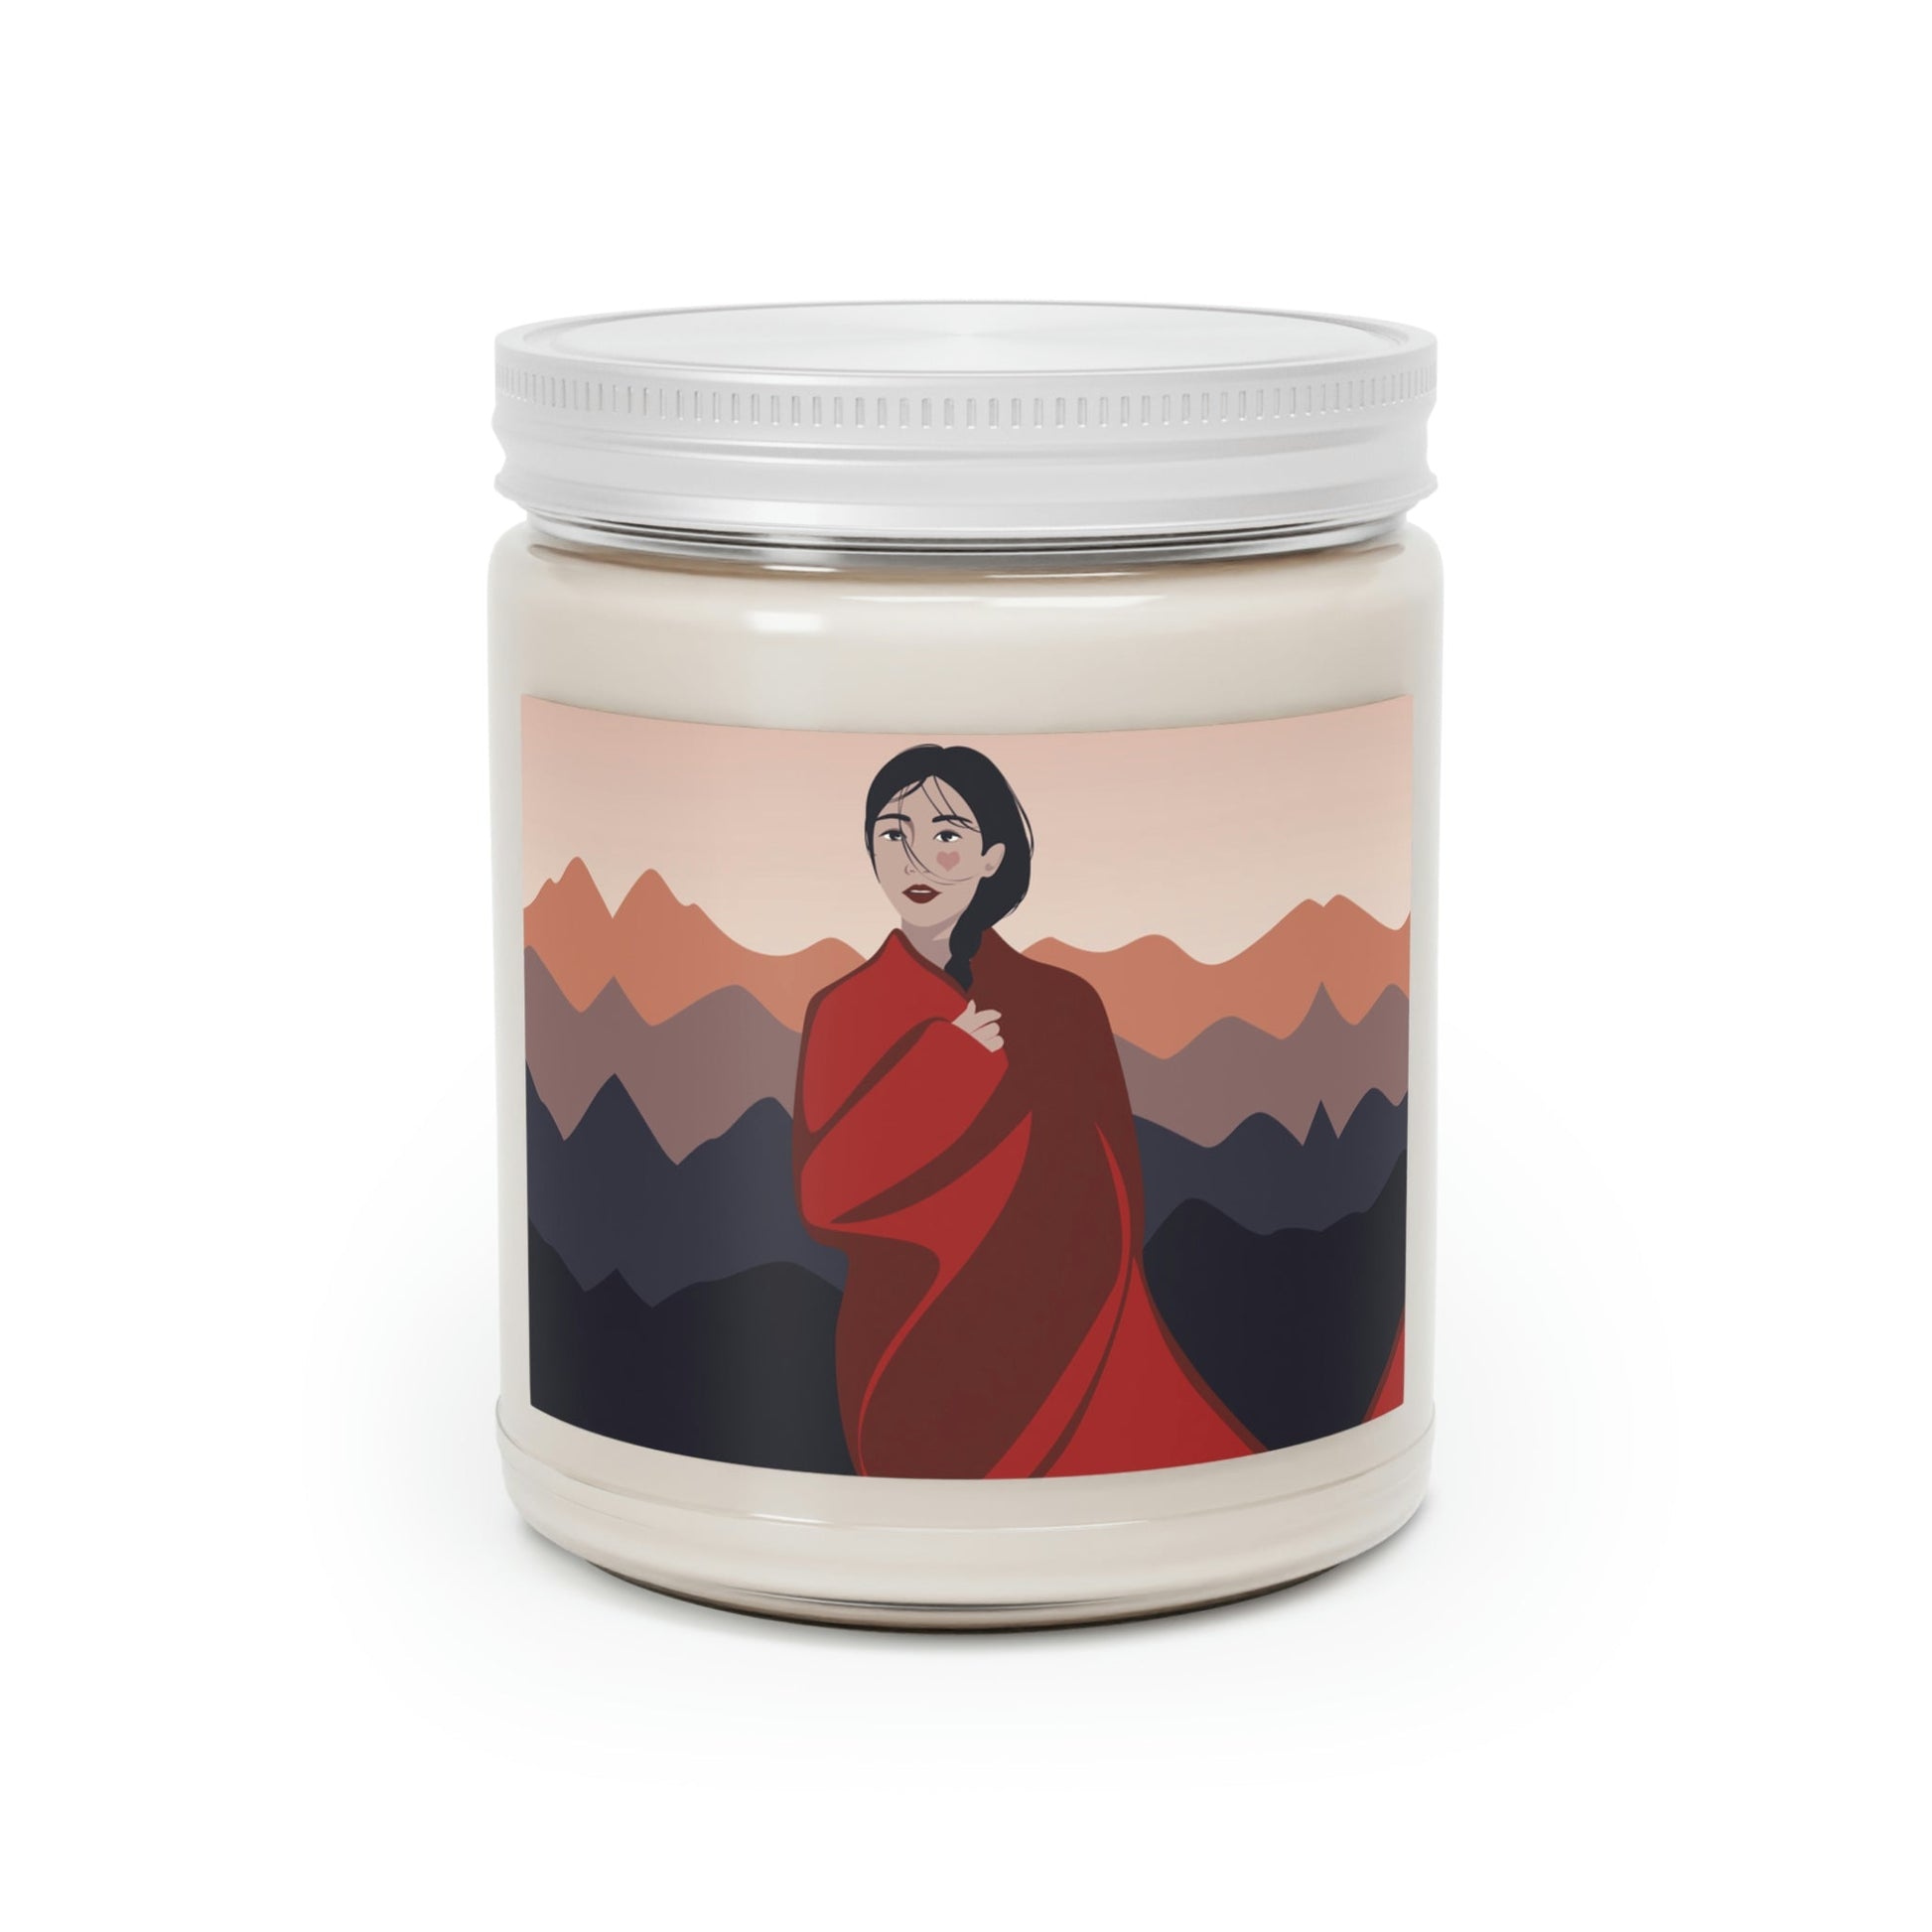 Stunning Woman in Traditional Japan Art Graphic Scented Candle Up to 60hSoy Wax 9oz Ichaku [Perfect Gifts Selection]